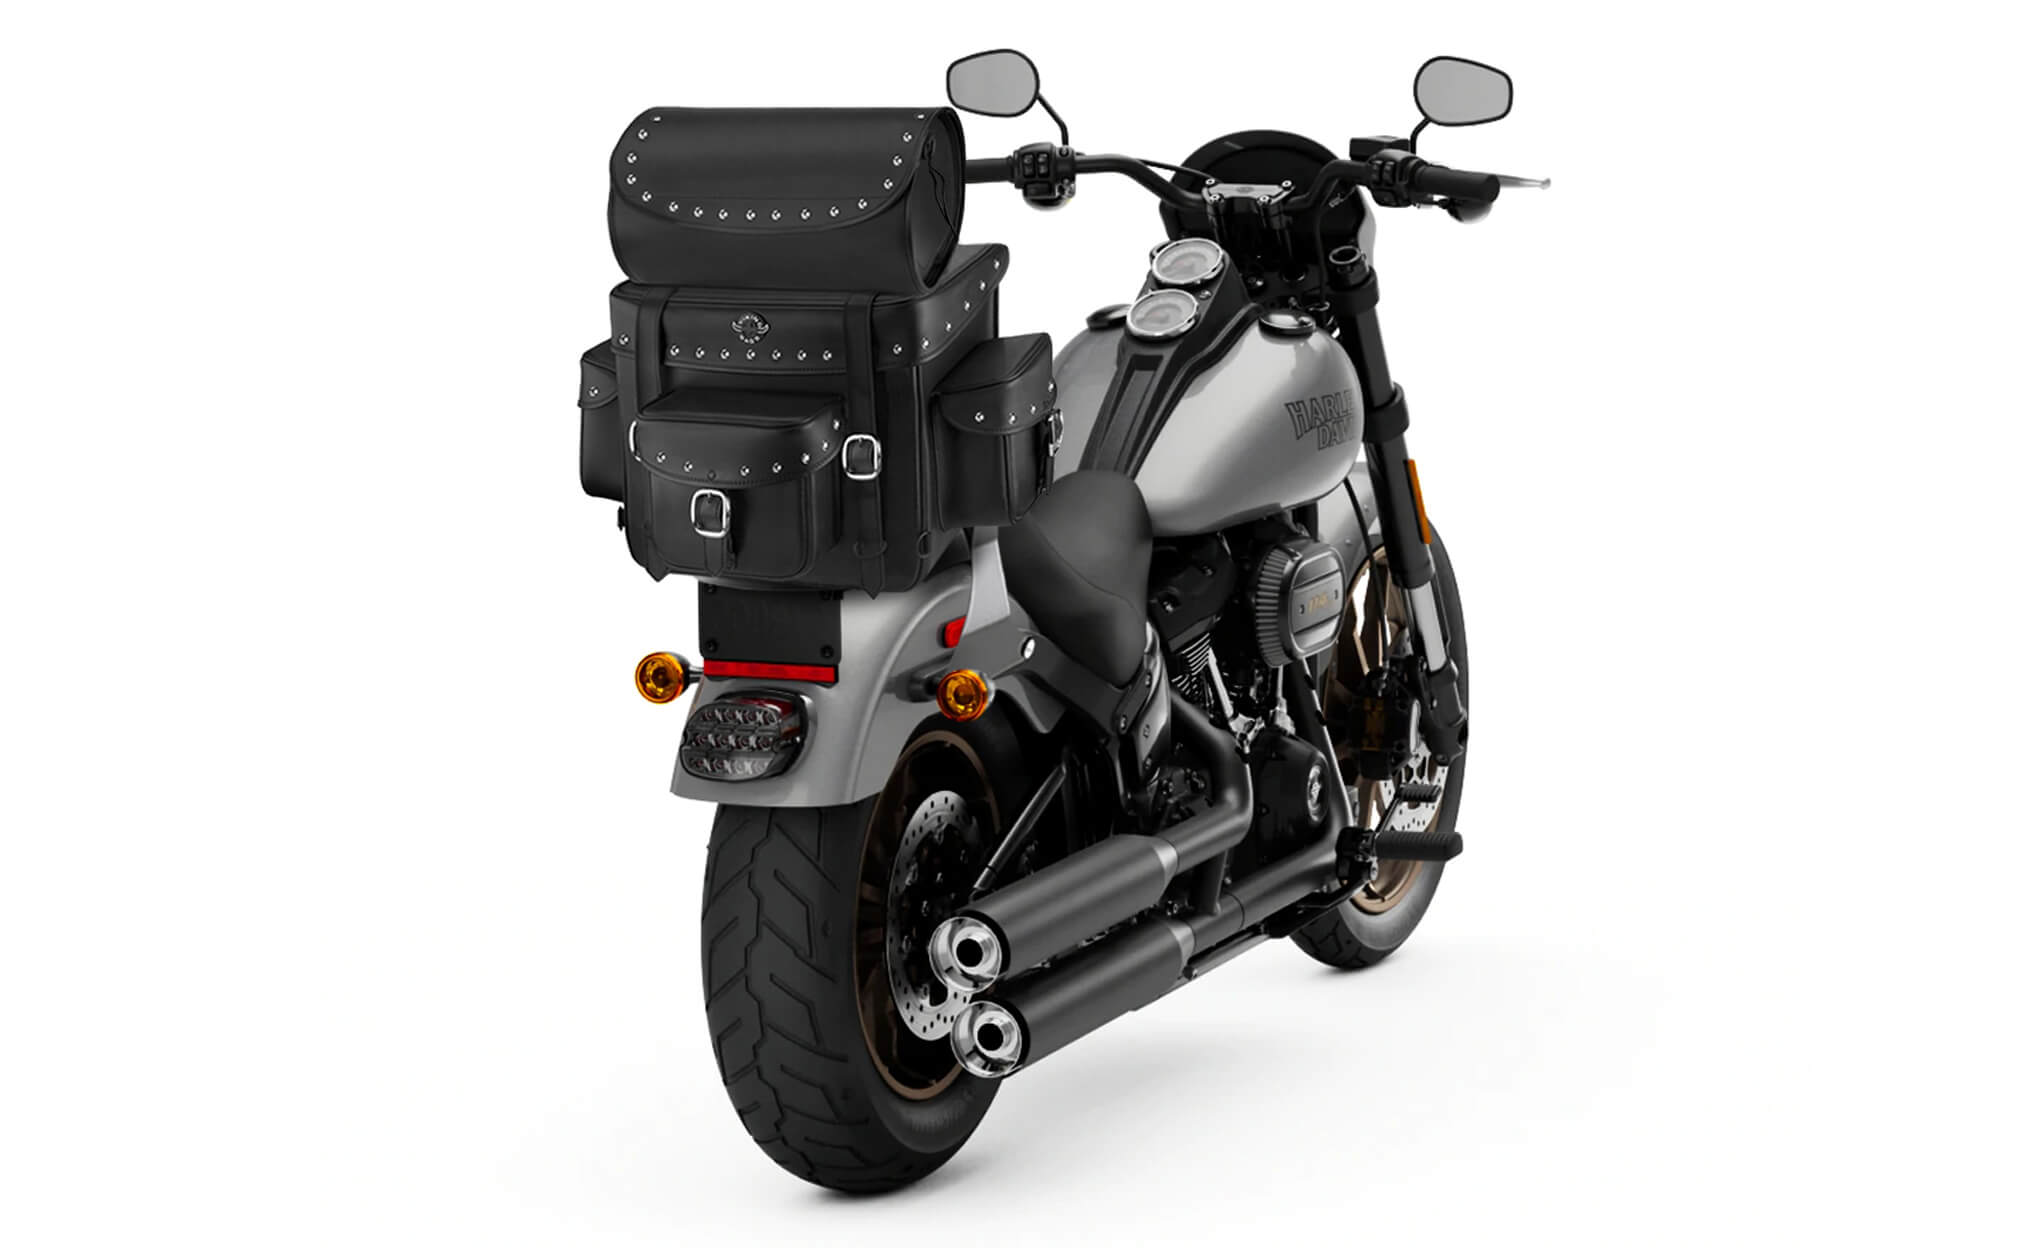 Viking Revival Series Large Victory Studded Motorcycle Sissy Bar Bag Bag on Bike View @expand